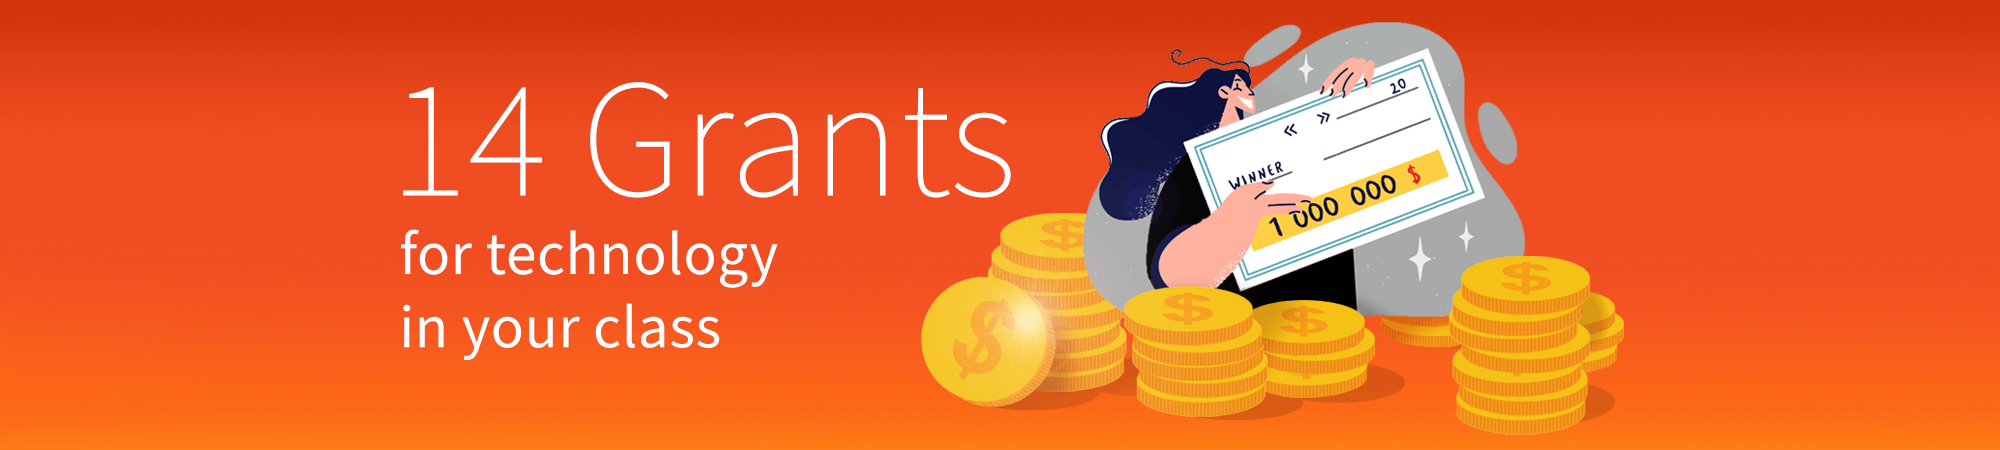 An illustrated banner image showing a person holding a cheque surrounded by stacks of coins. White text against an orange background reads, "14 Grants for Technology in Your Class".